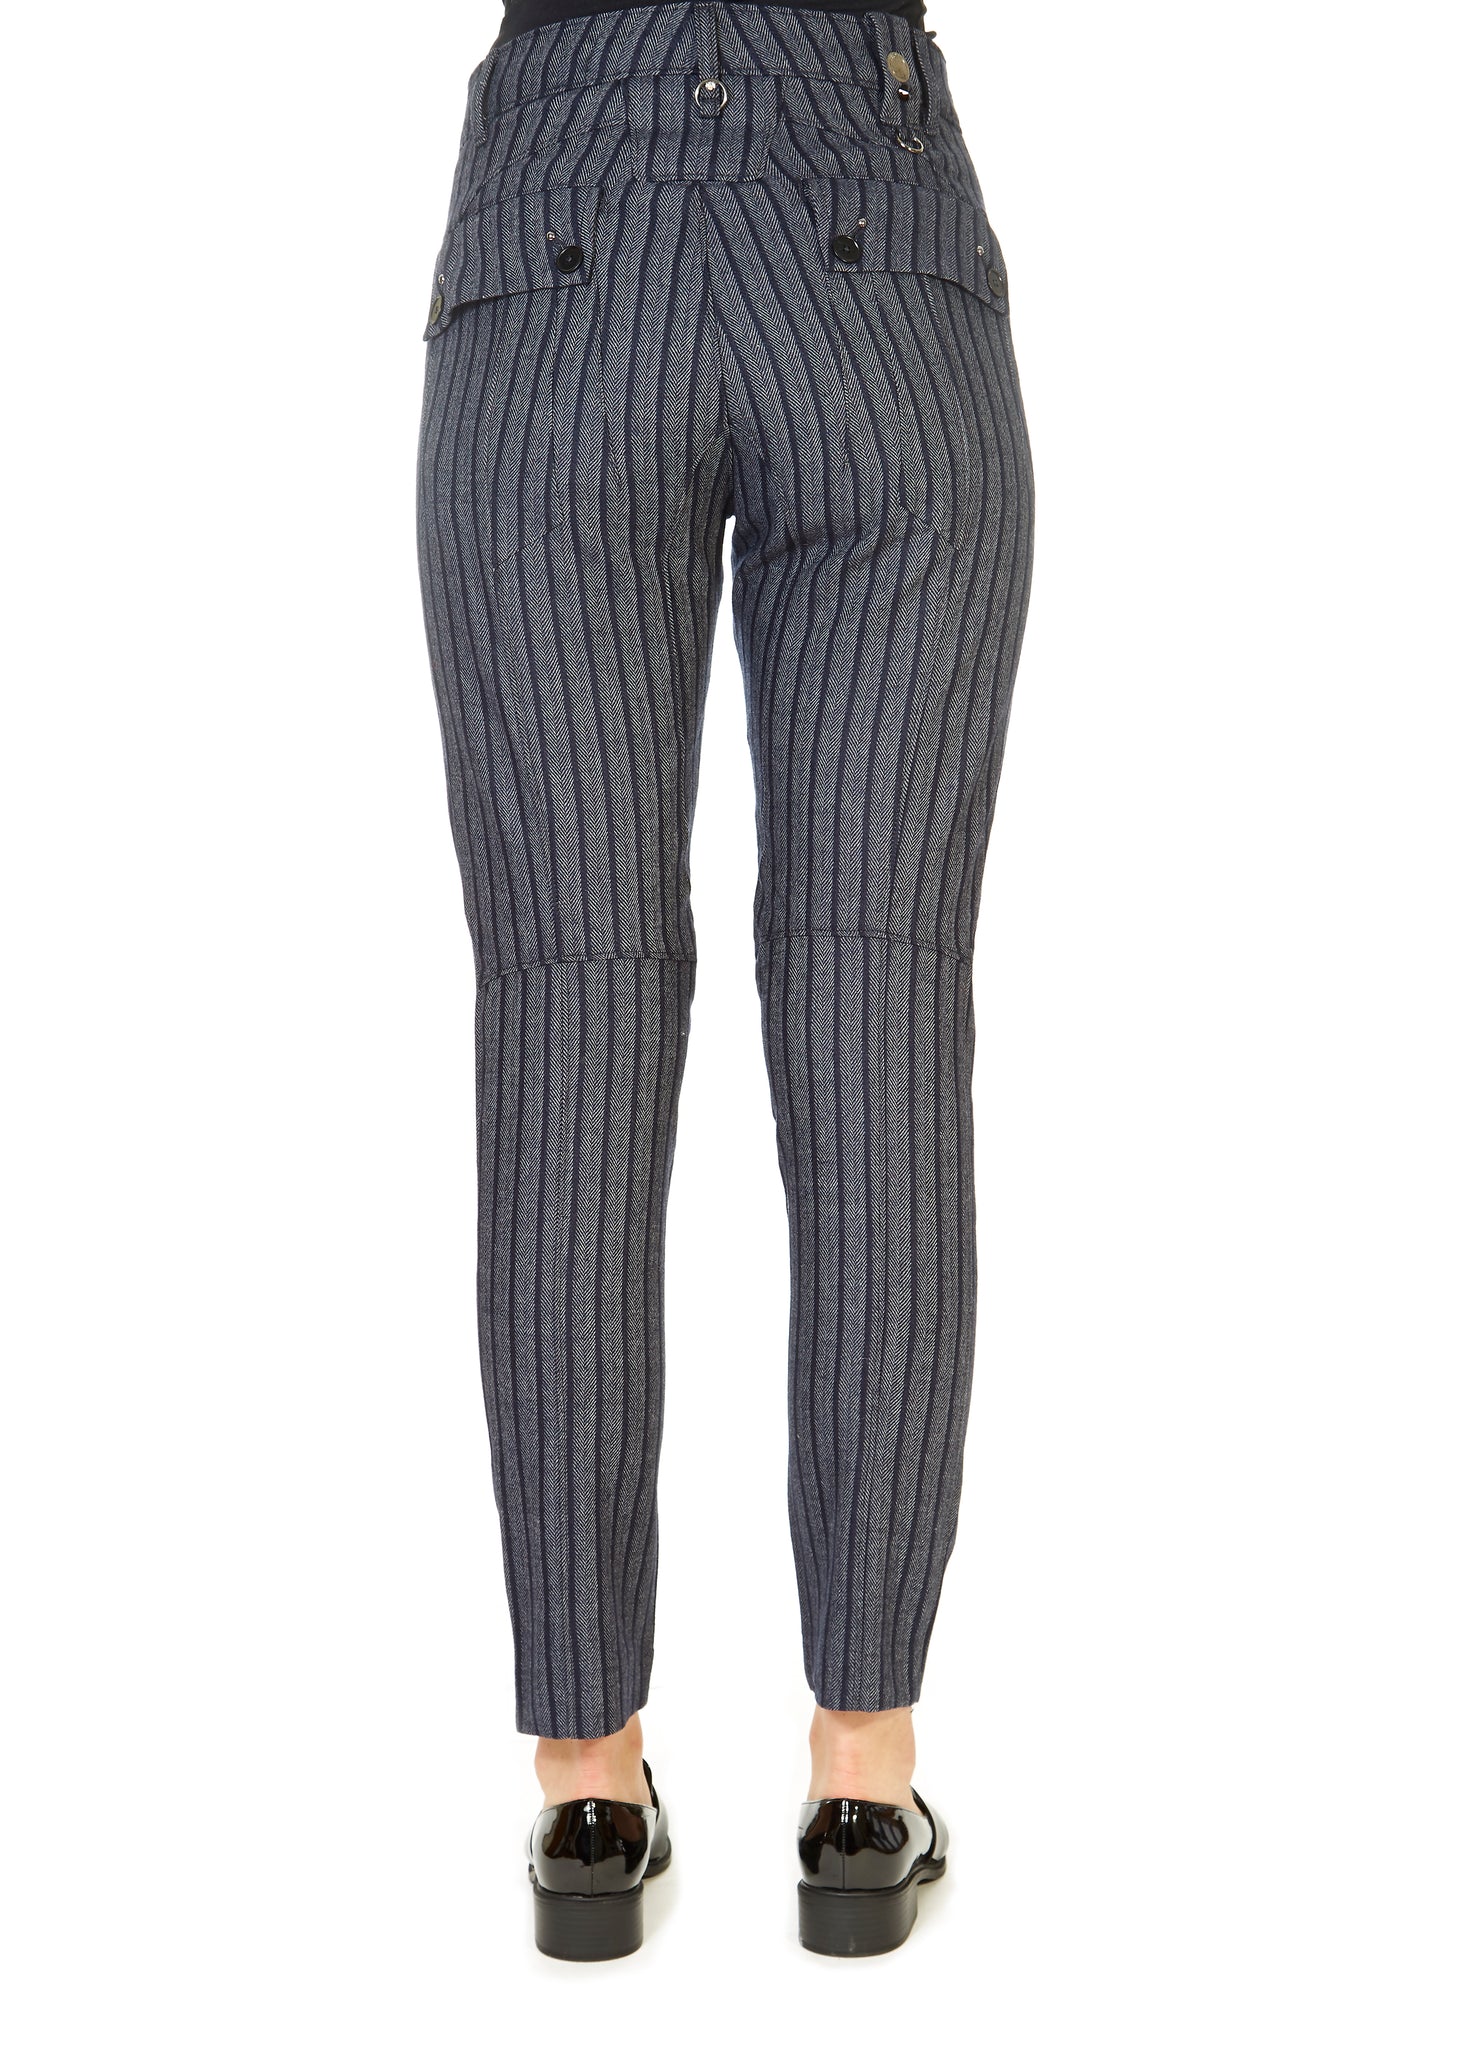 'In Motion' Grey Striped Trousers - Jessimara